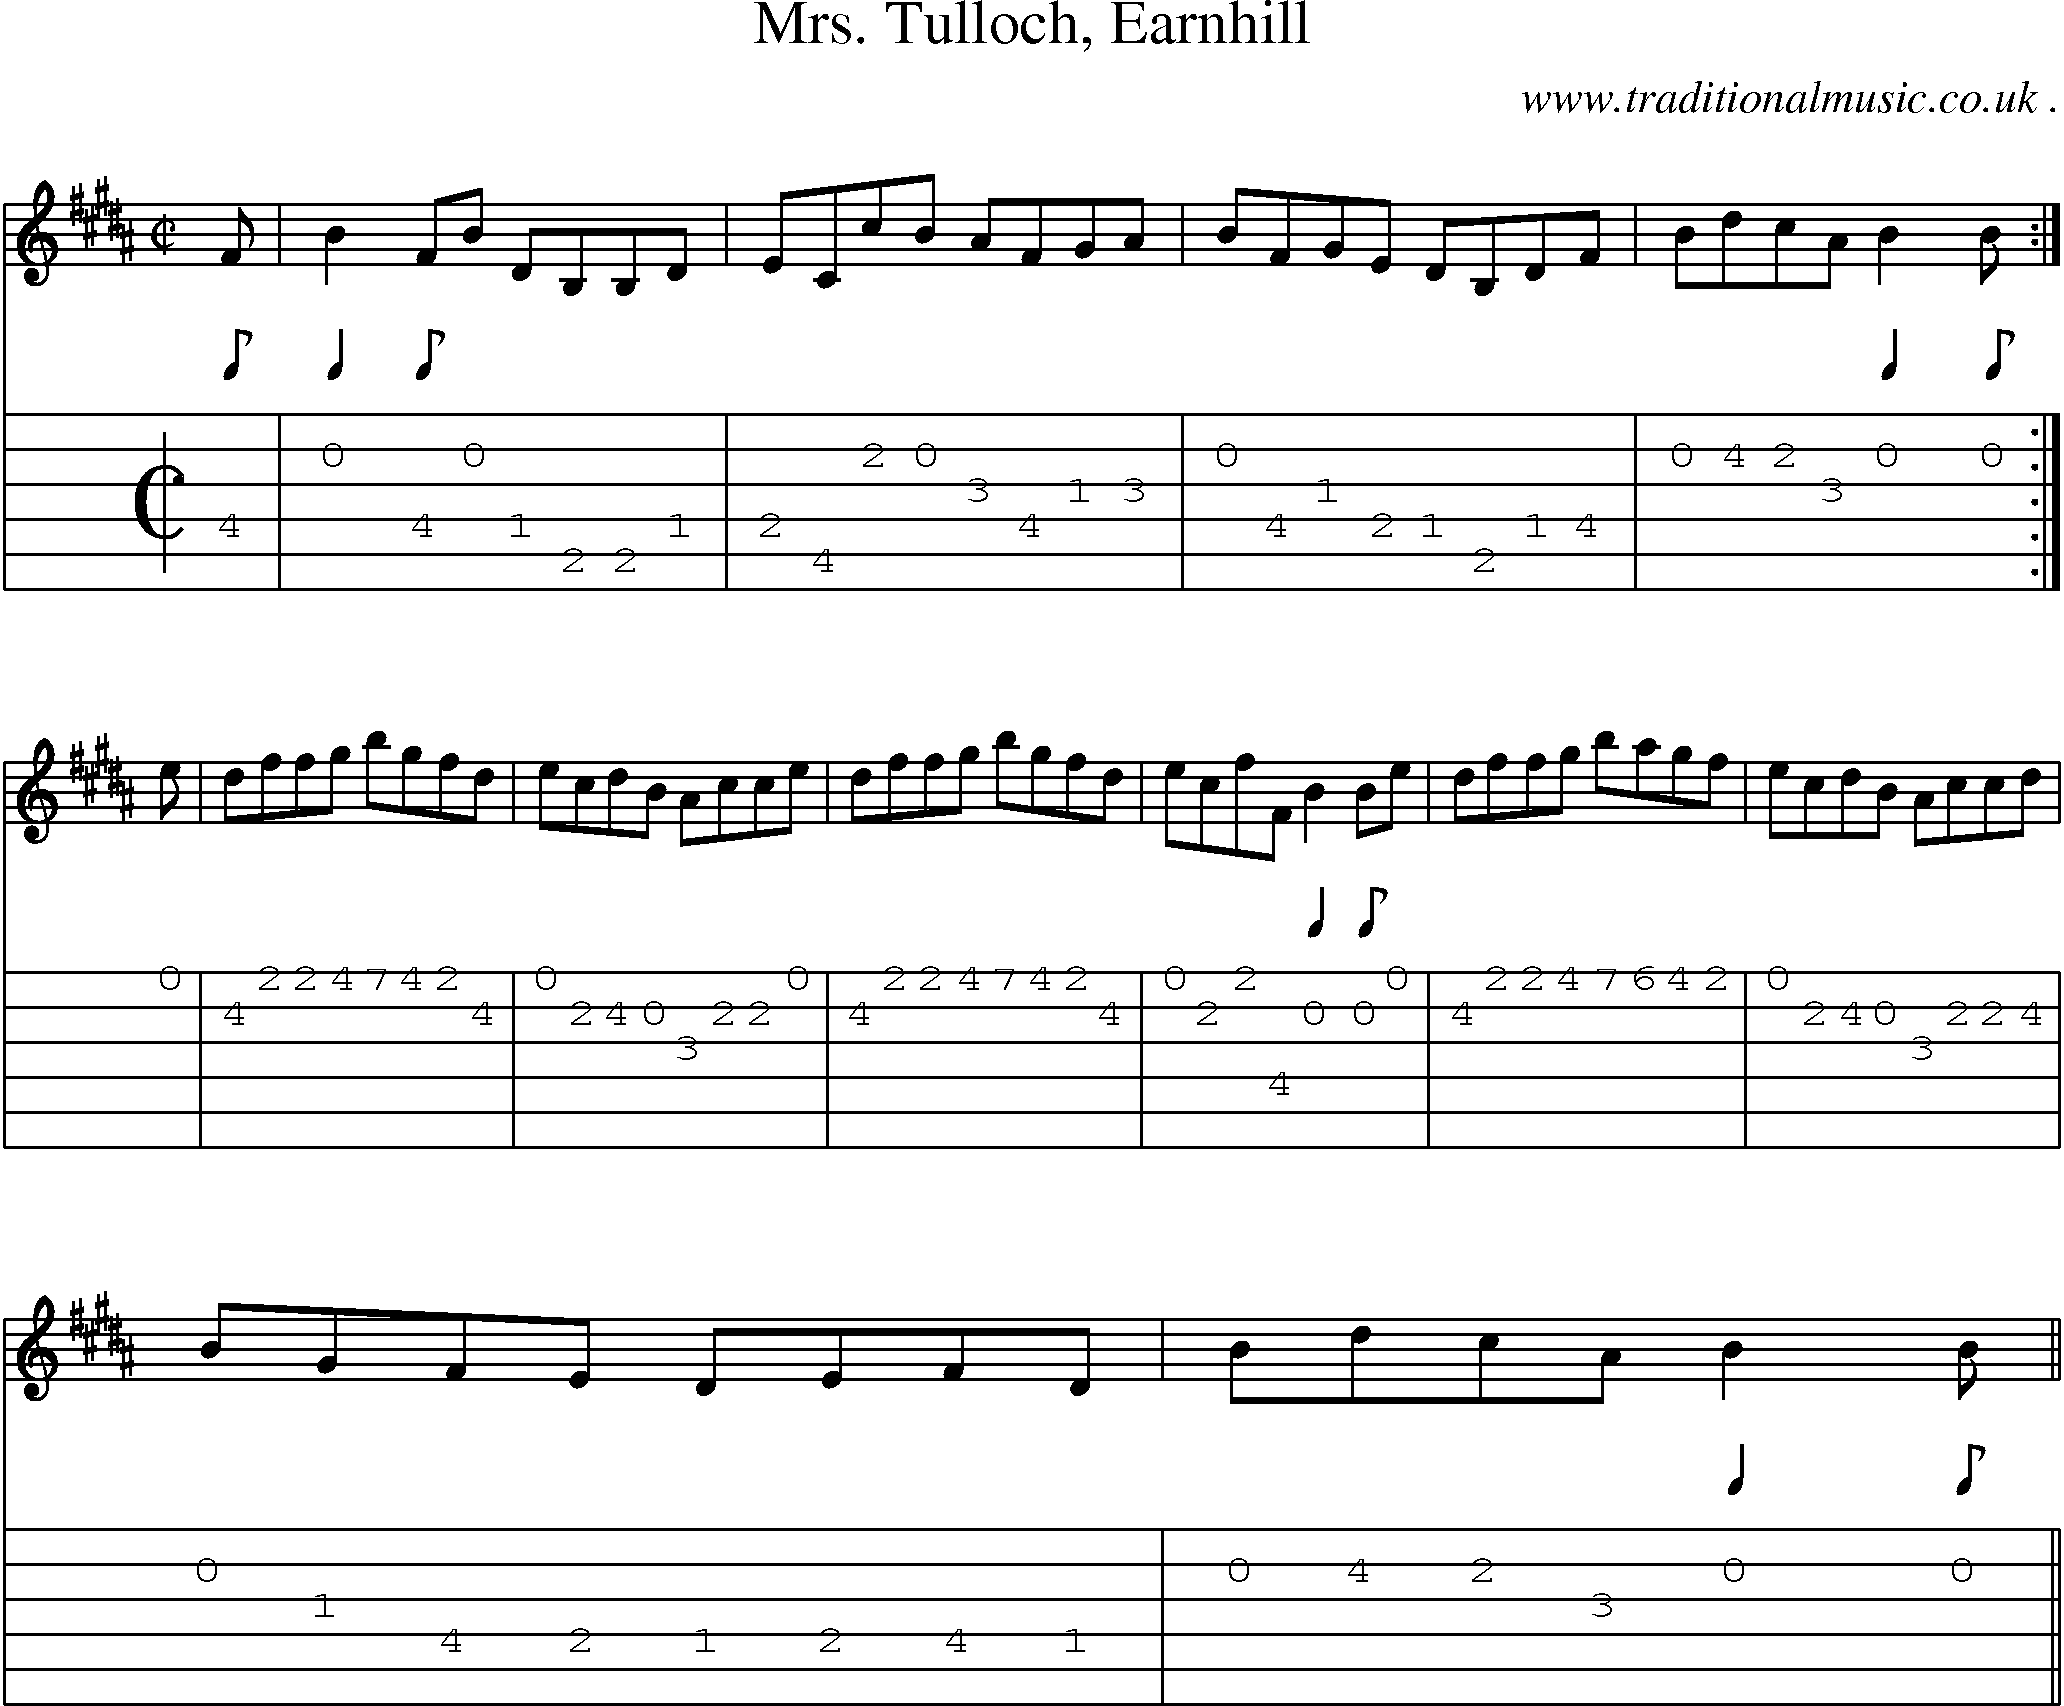 Sheet-music  score, Chords and Guitar Tabs for Mrs Tulloch Earnhill